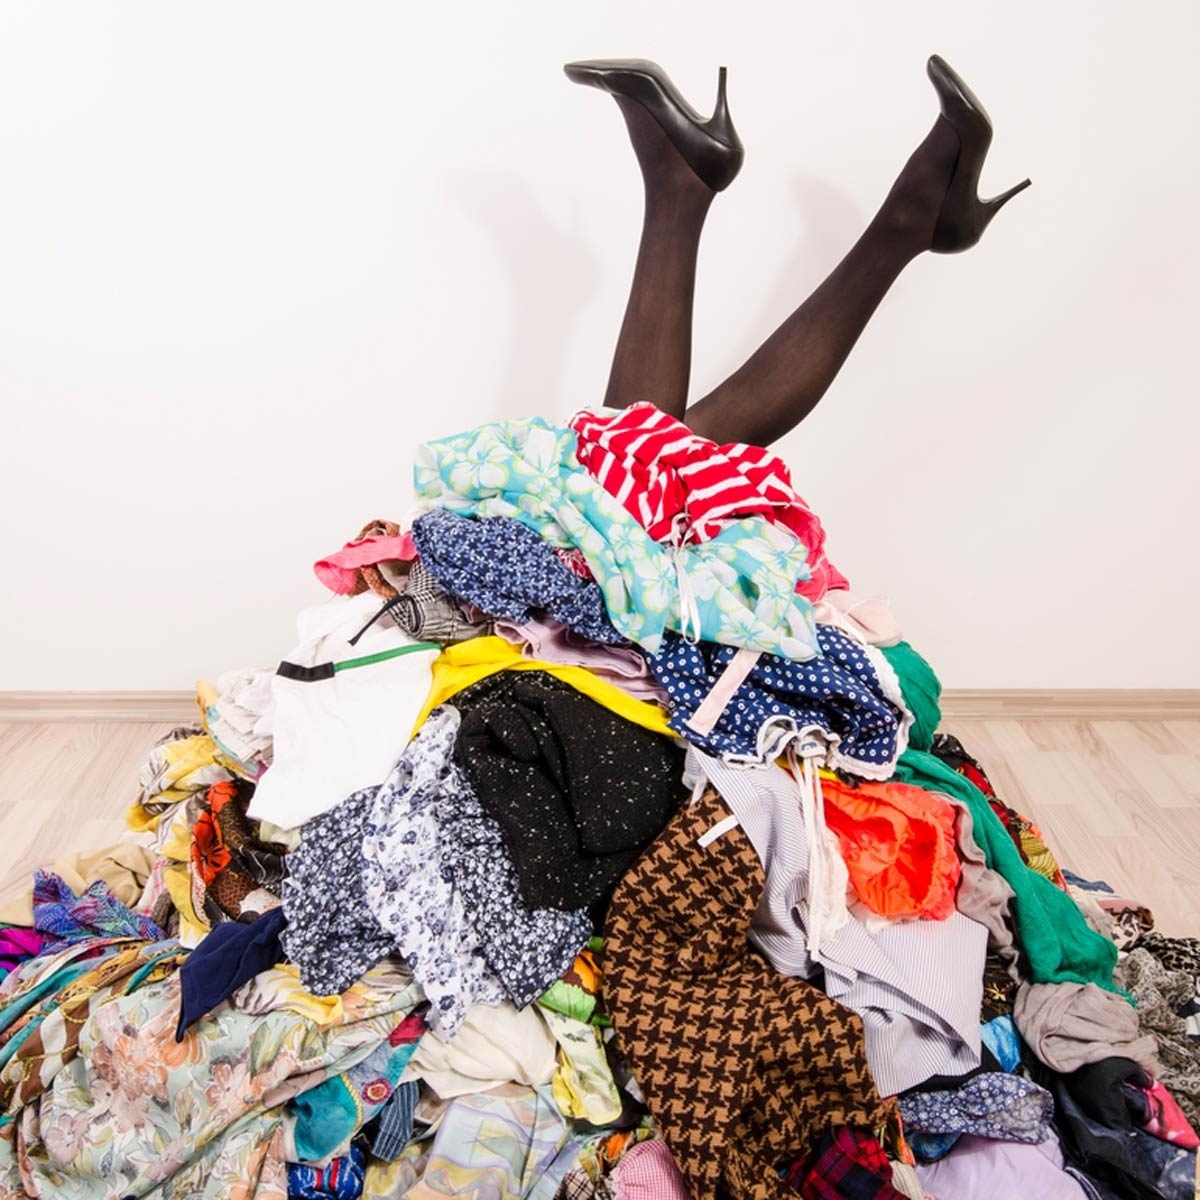 If You Want to Declutter, Stop Buying These Items